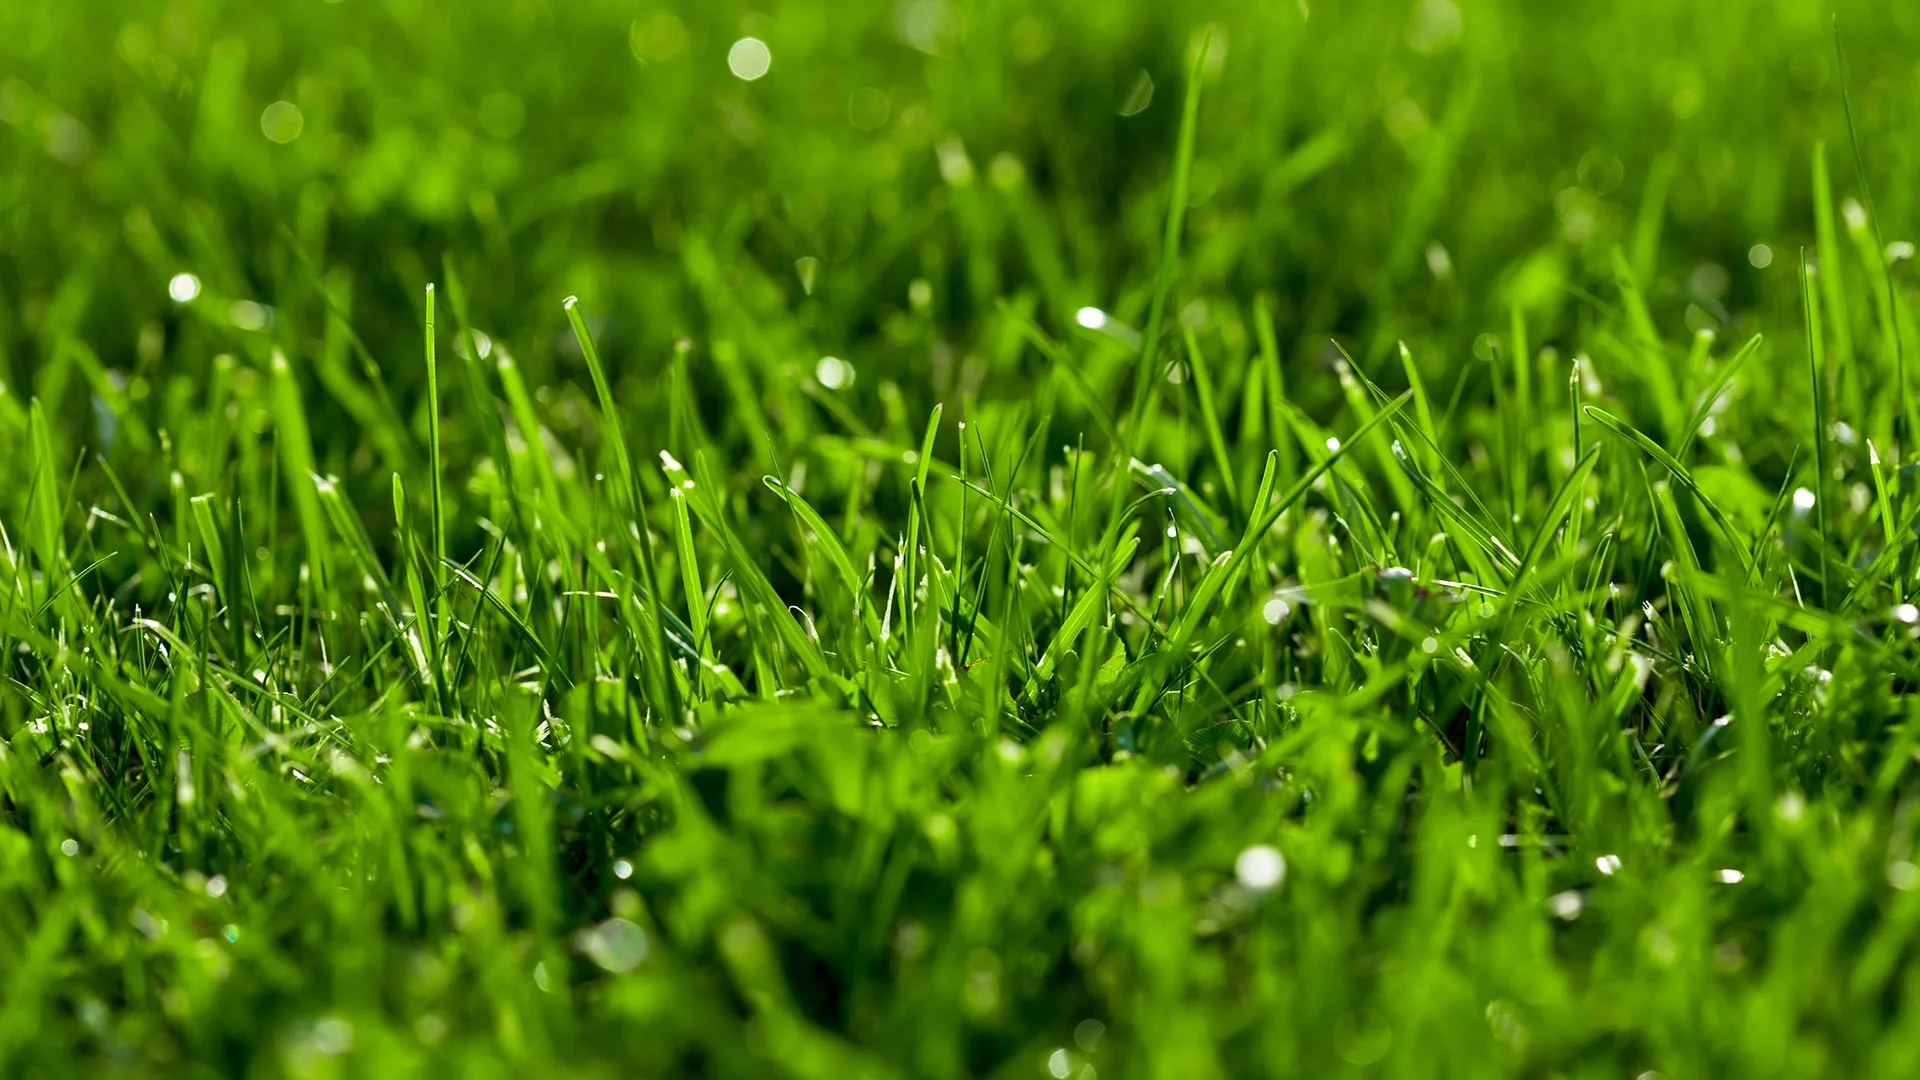 A healthy lawn with dew drops over grass blades in Altoona, IA.